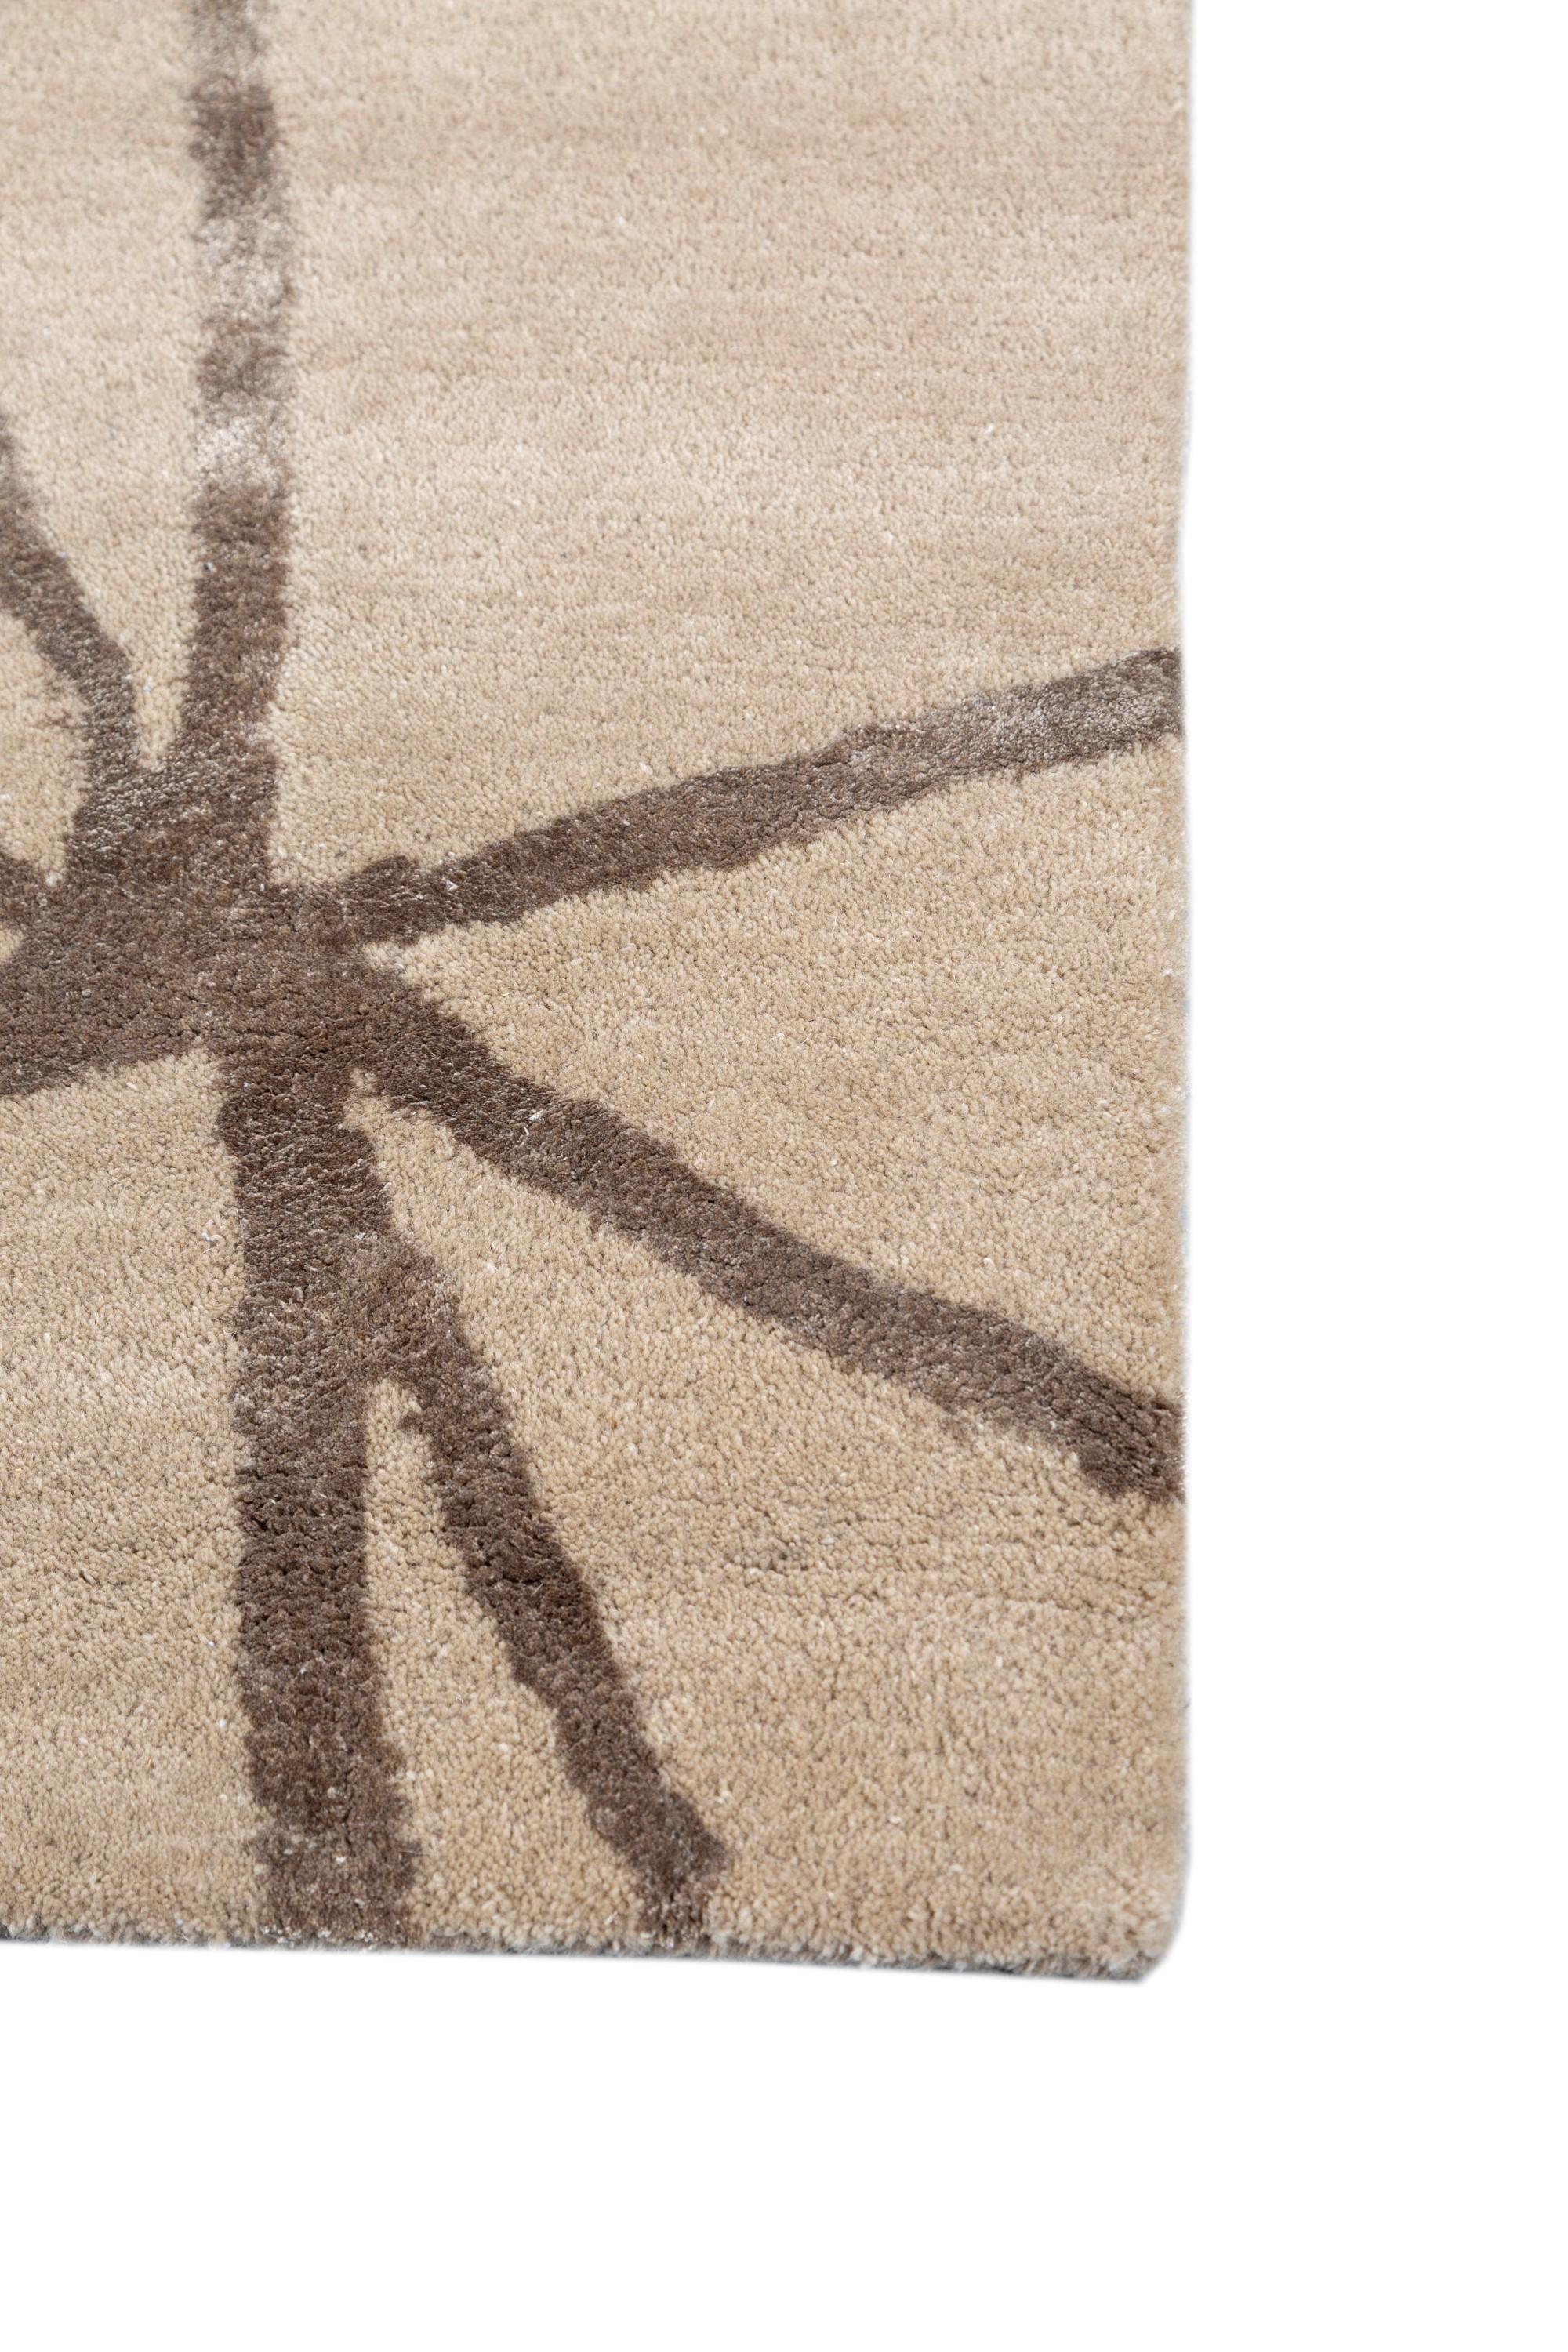 Introducing this designer rug from our Cascade collection, a masterpiece that seamlessly blends intricate patterns in a soothing palate. The complex design of this rug is a visual symphony, carefully woven to evoke a sense of calmness in any space